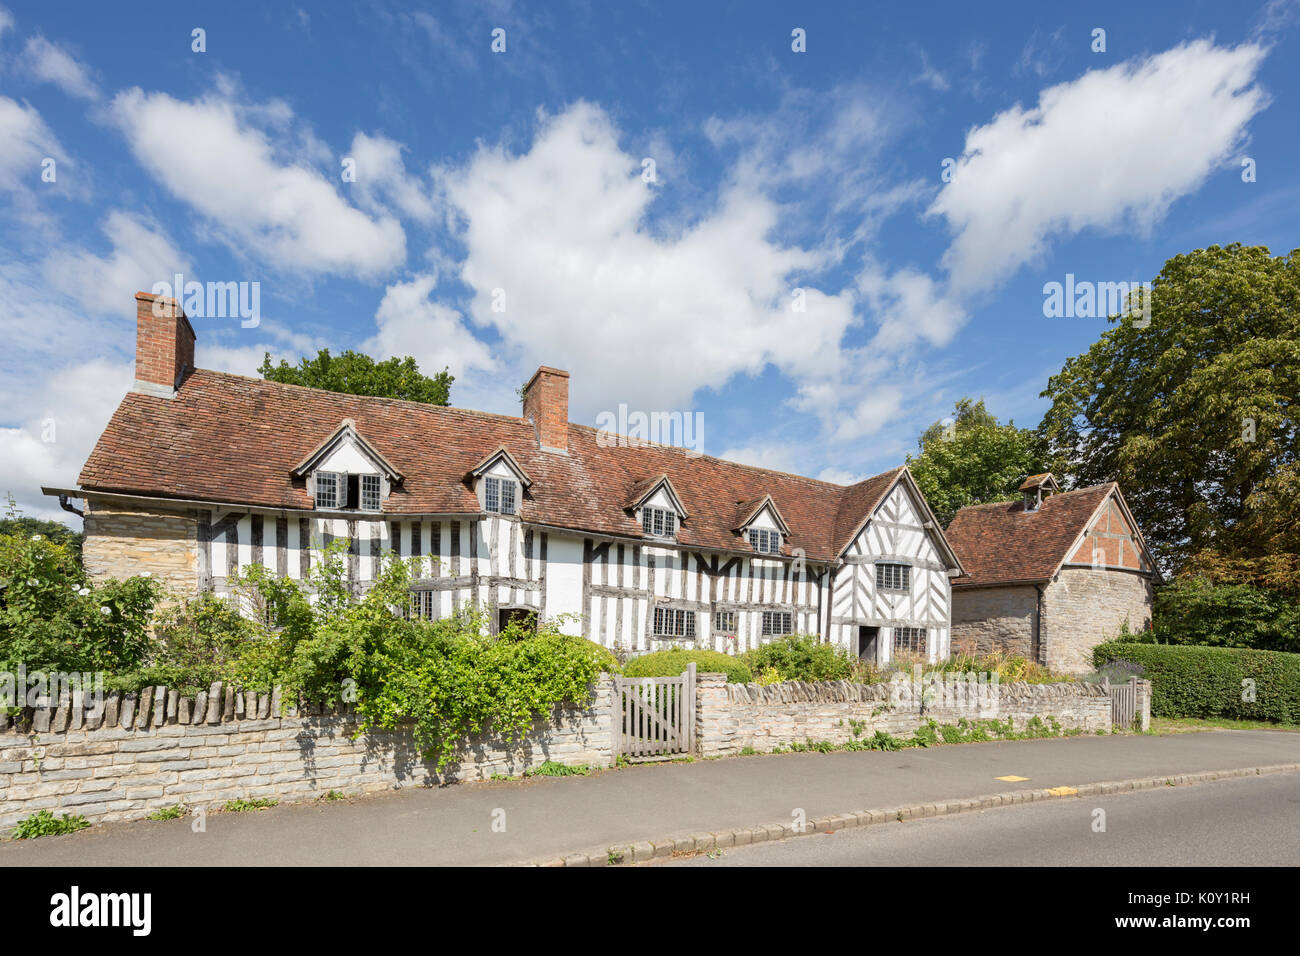 Mary Arden's Farm home of William Shakespeare's mother, Wilmcote, Stock Photo